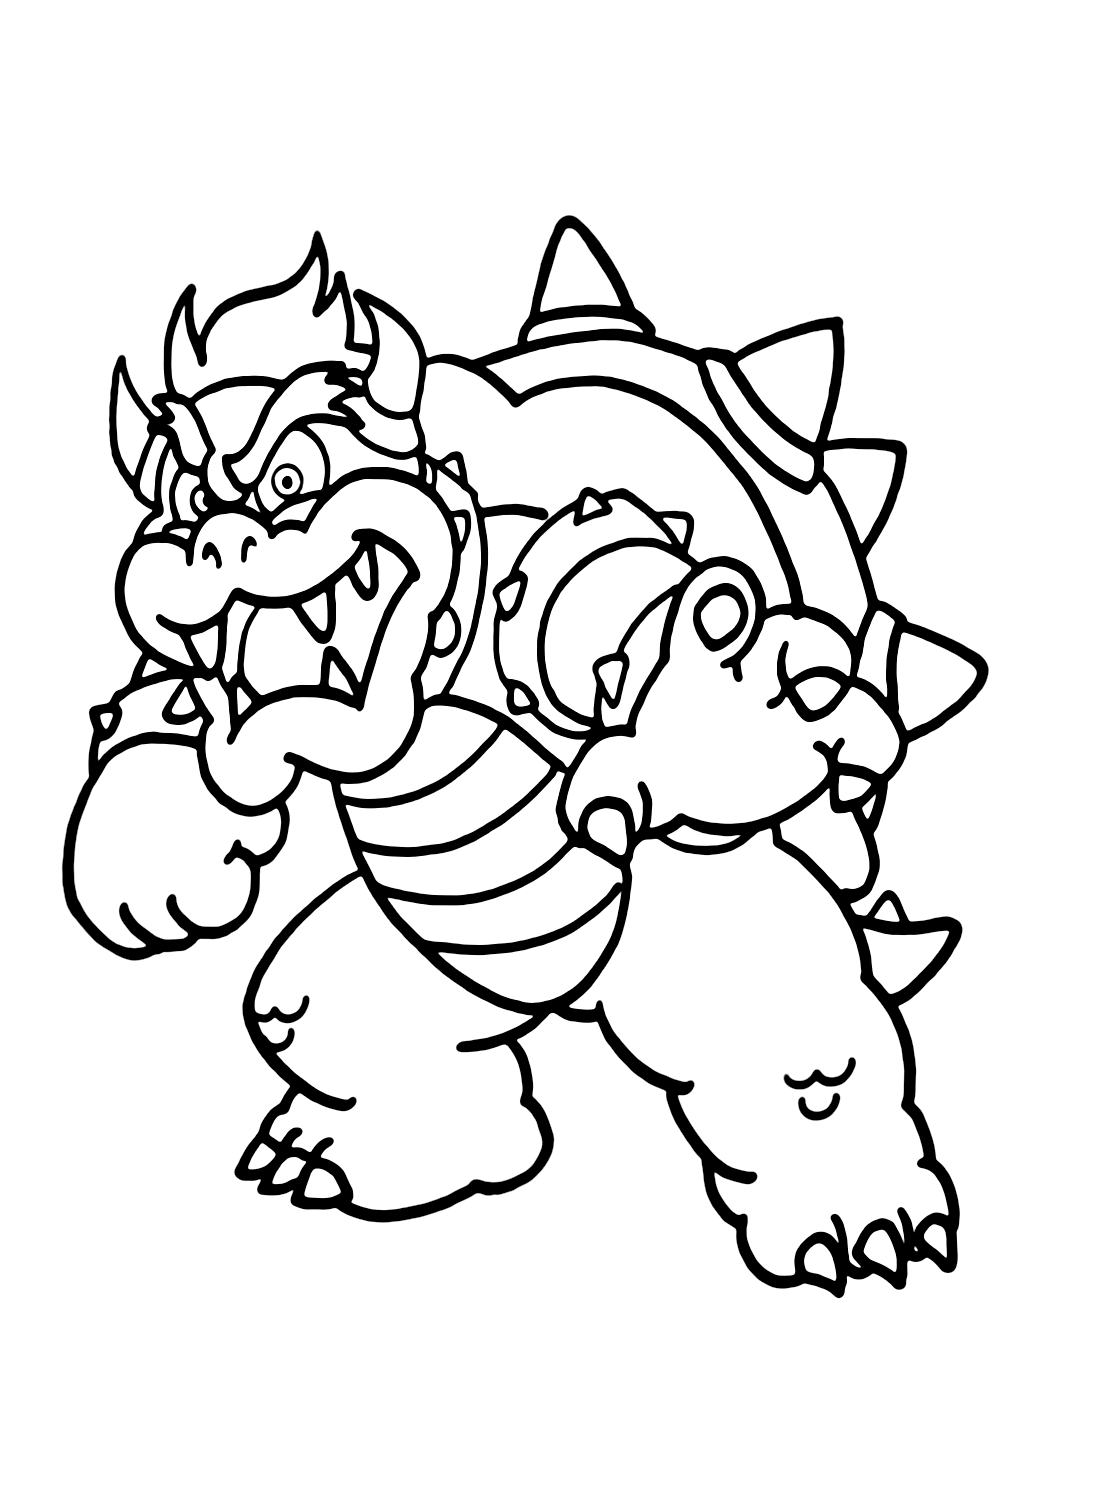 Images Bowser from Super Mario Coloring Pages